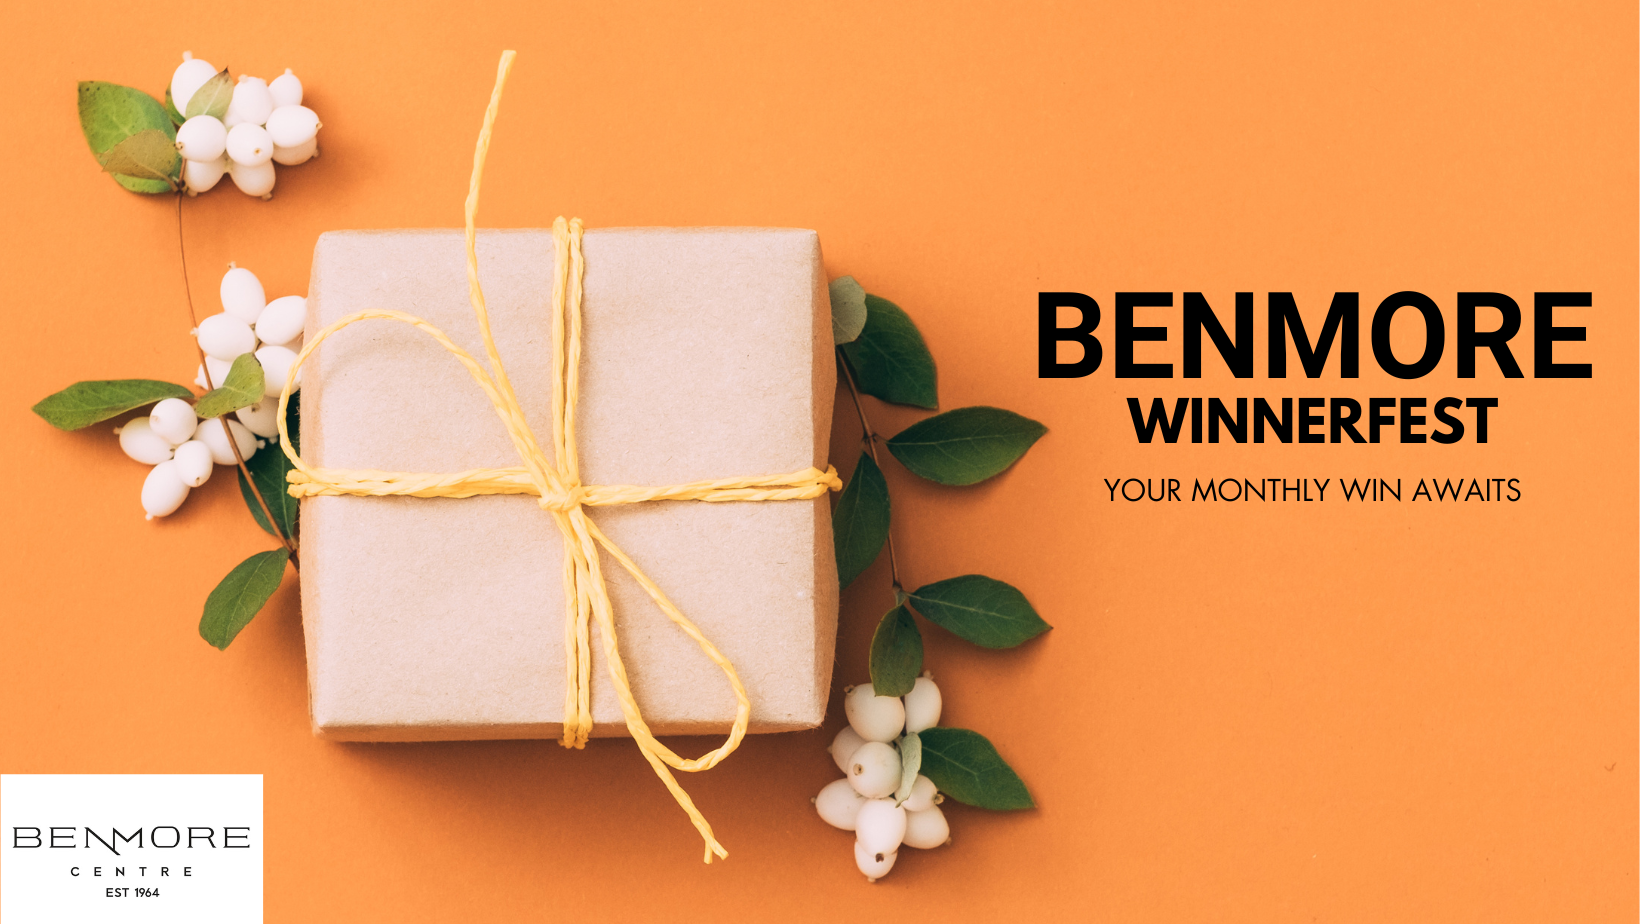 Join us at Benmore Winnerfest as we honor mothers throughout May!